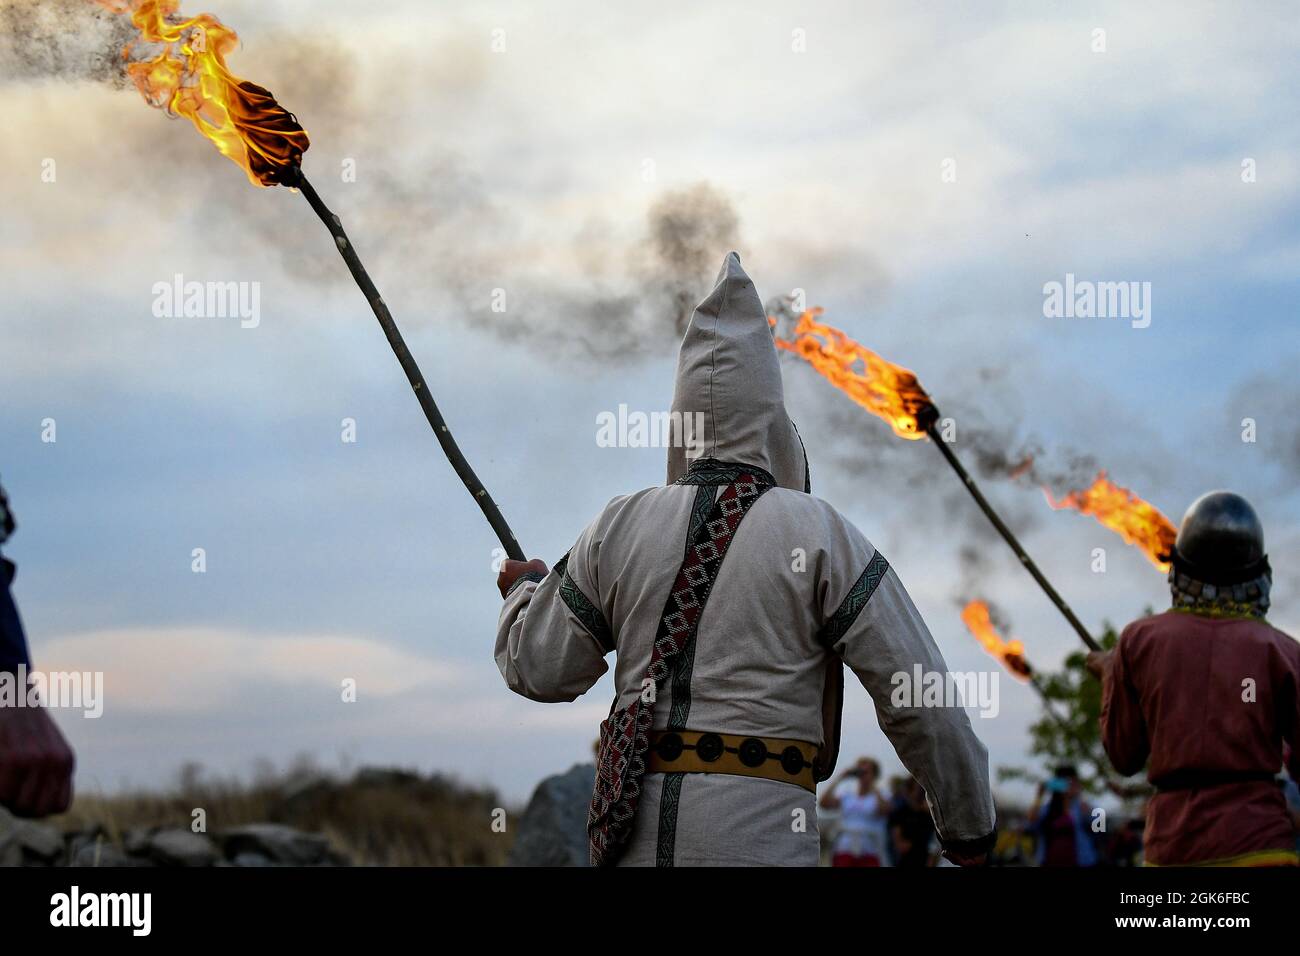 ZAPORIZHZHIA REGION, UKRAINE - SEPTEMBER 11, 2021 - History enthusiasts in period costumes carry burning torches during the Legends of Steppe 2021 Ope Stock Photo